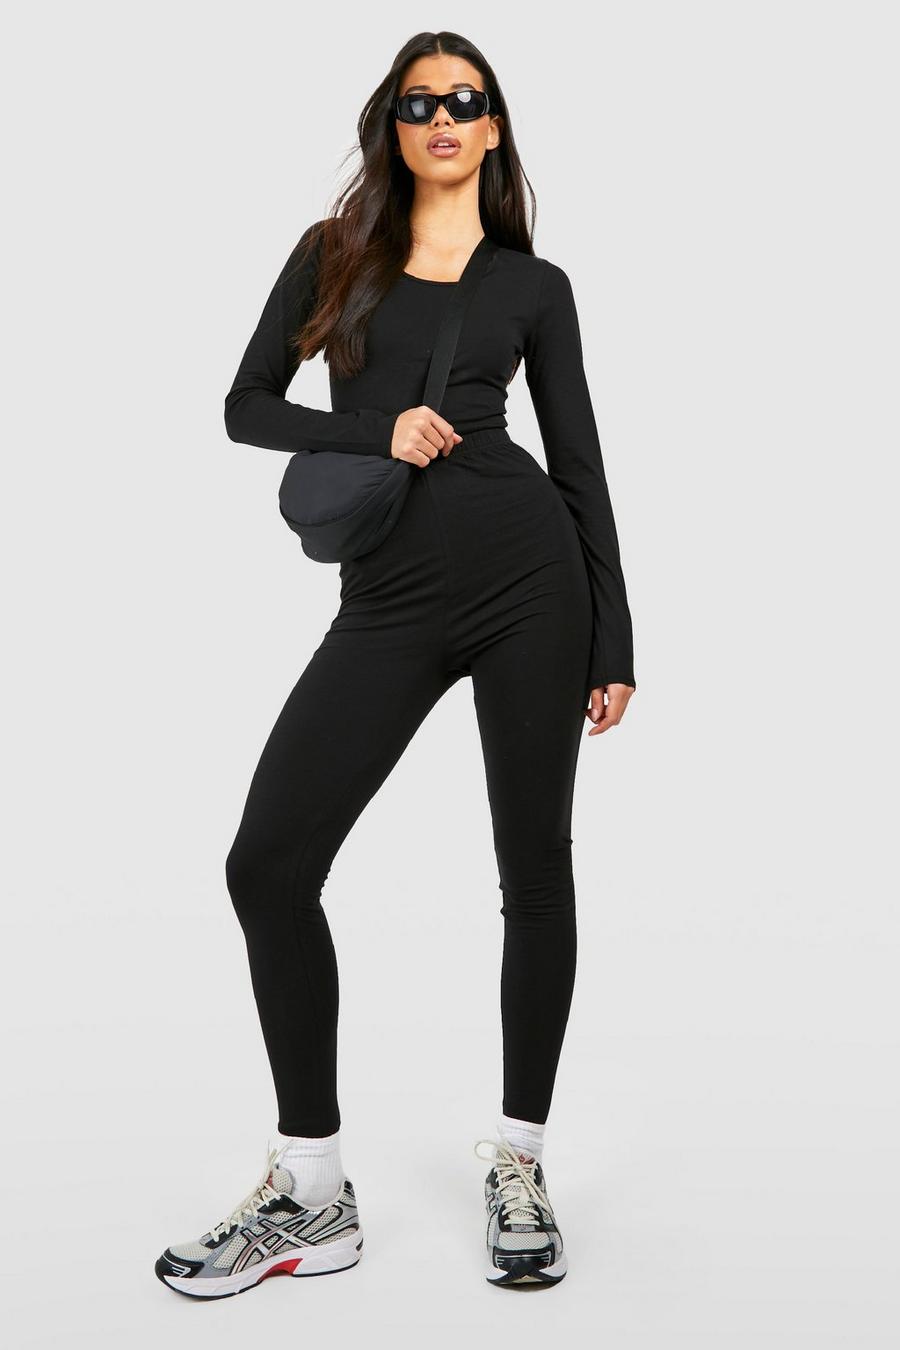 Why Your Wardrobe Needs High Waisted Workout Leggings